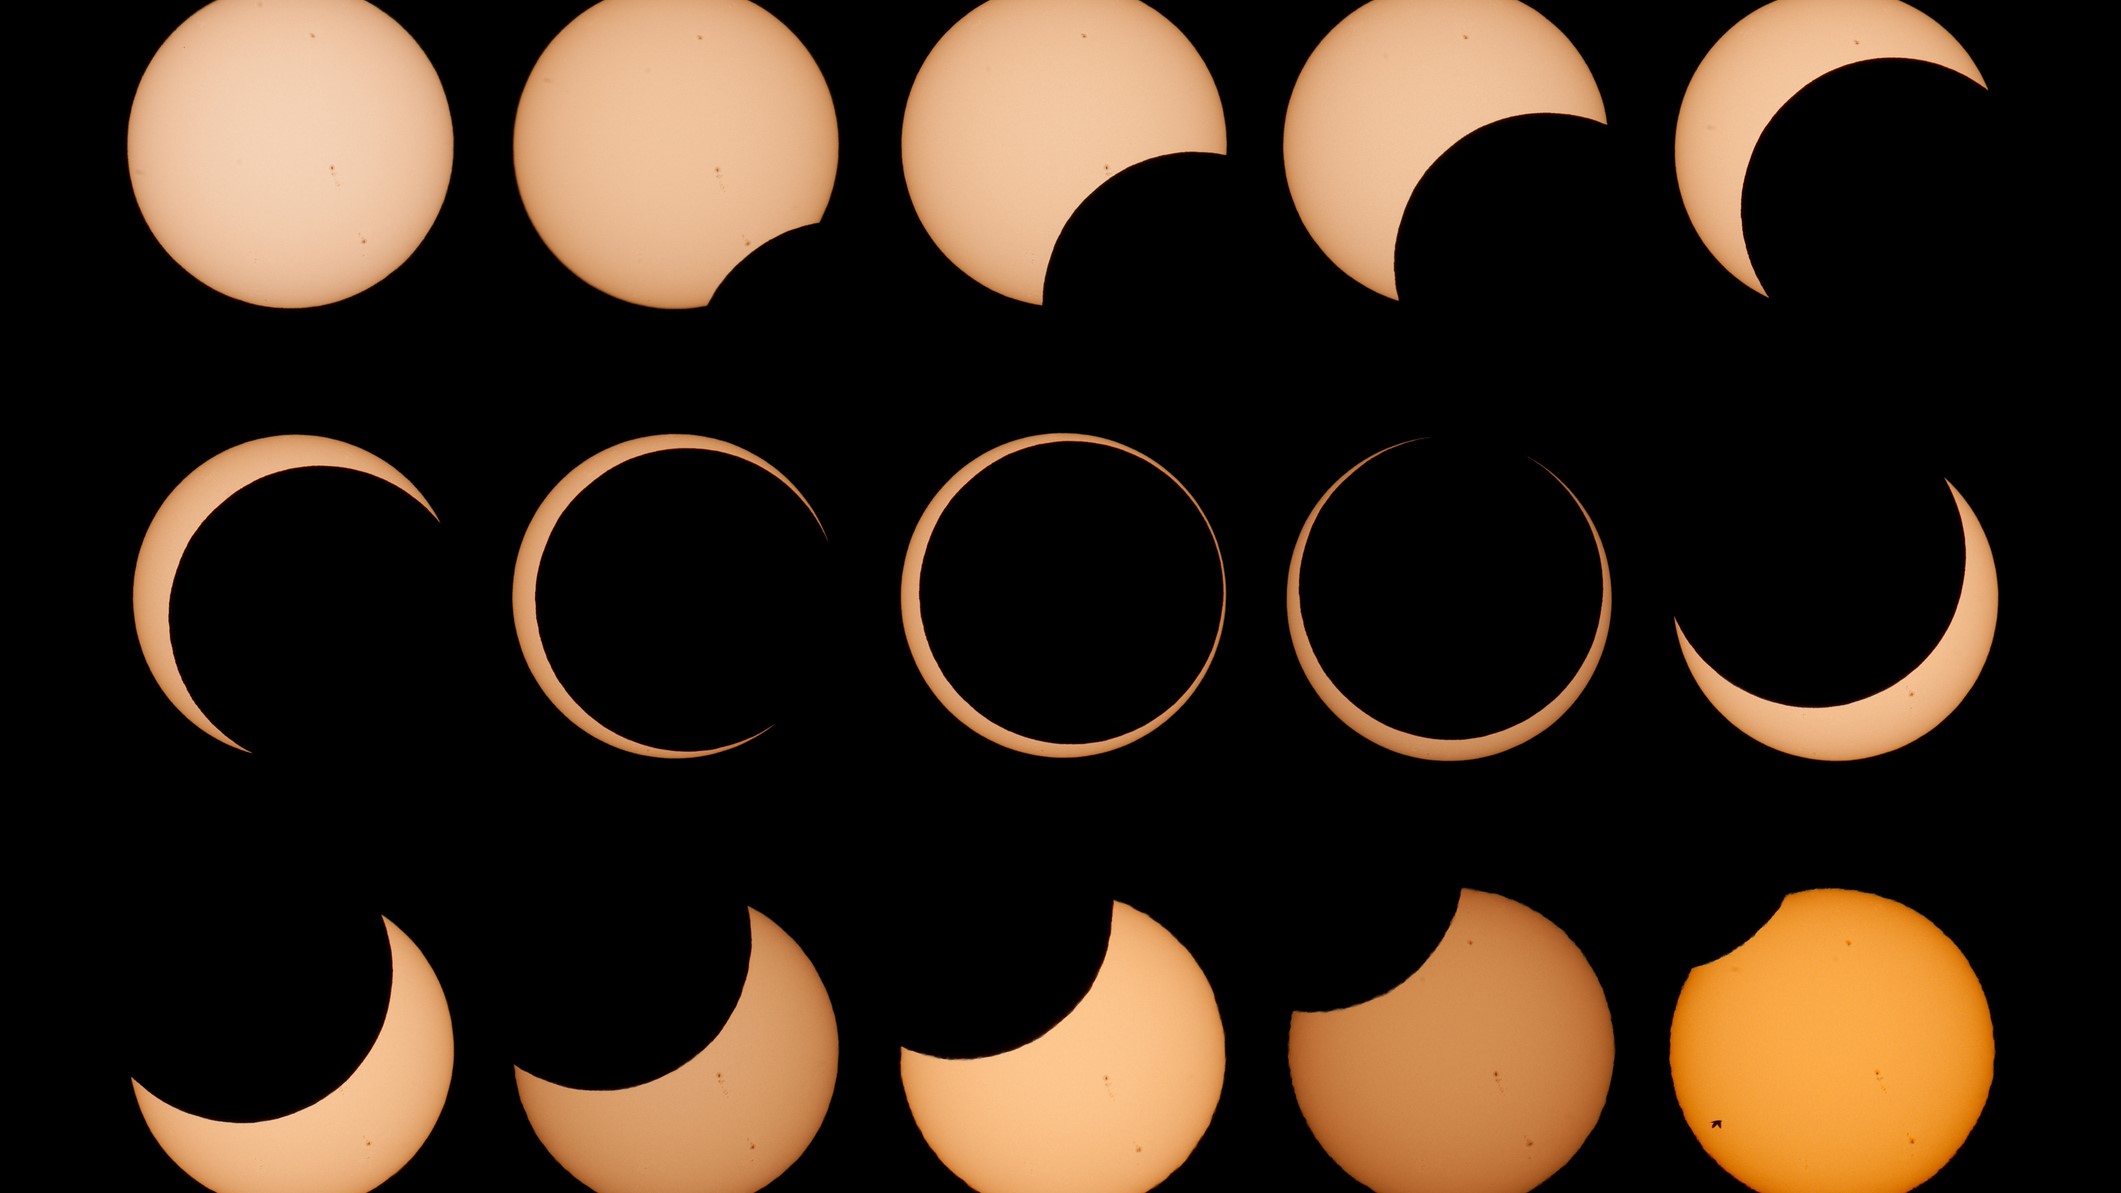 Annular solar eclipse 2024: Everything you need to know about the next solar eclipse Space